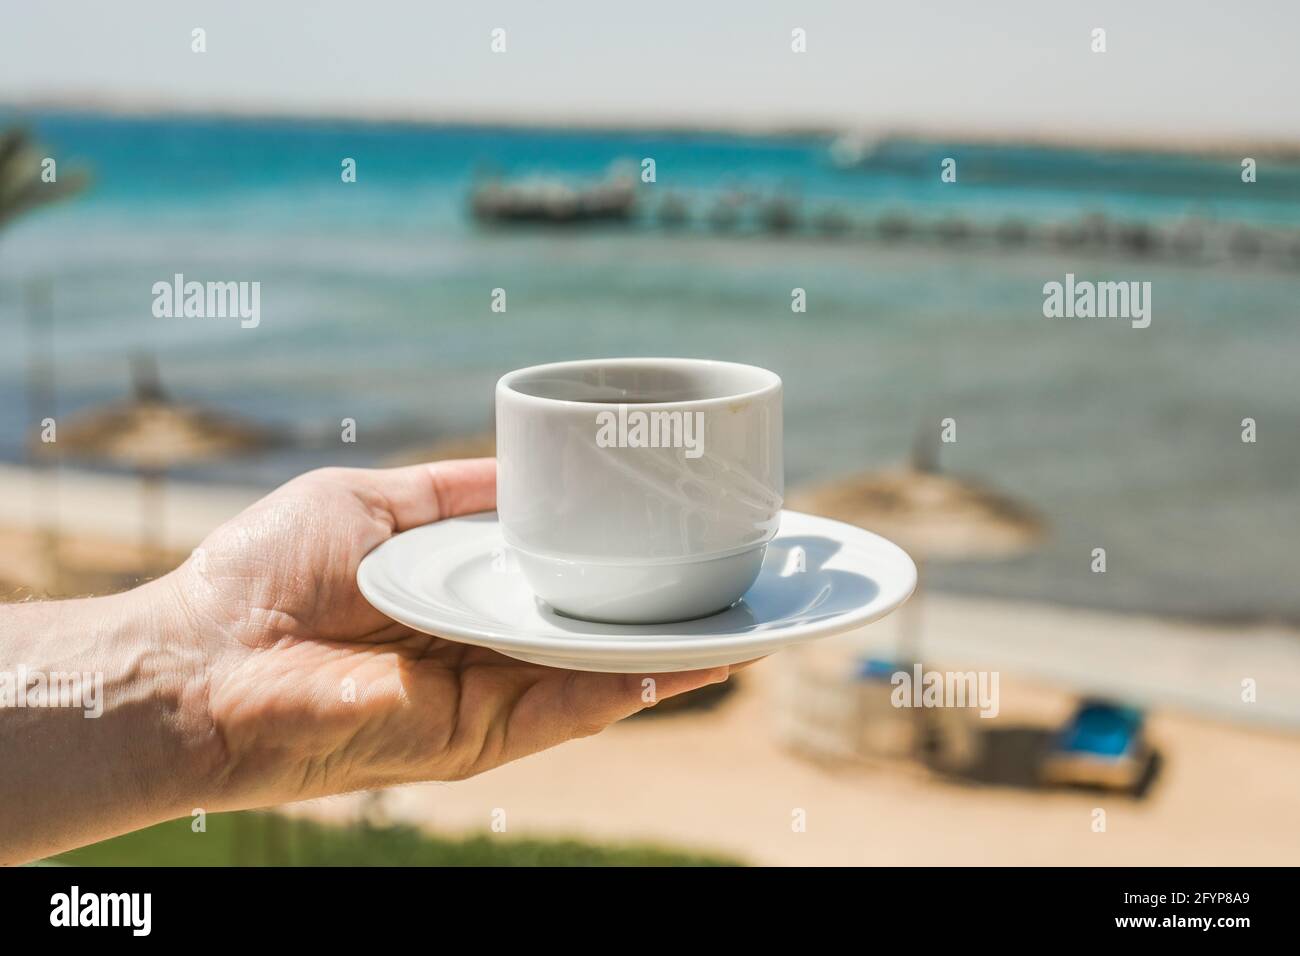 https://c8.alamy.com/comp/2FYP8A9/man-hands-holding-cup-of-coffee-good-morning-sunrise-concept-lets-start-a-new-day-space-for-text-2FYP8A9.jpg